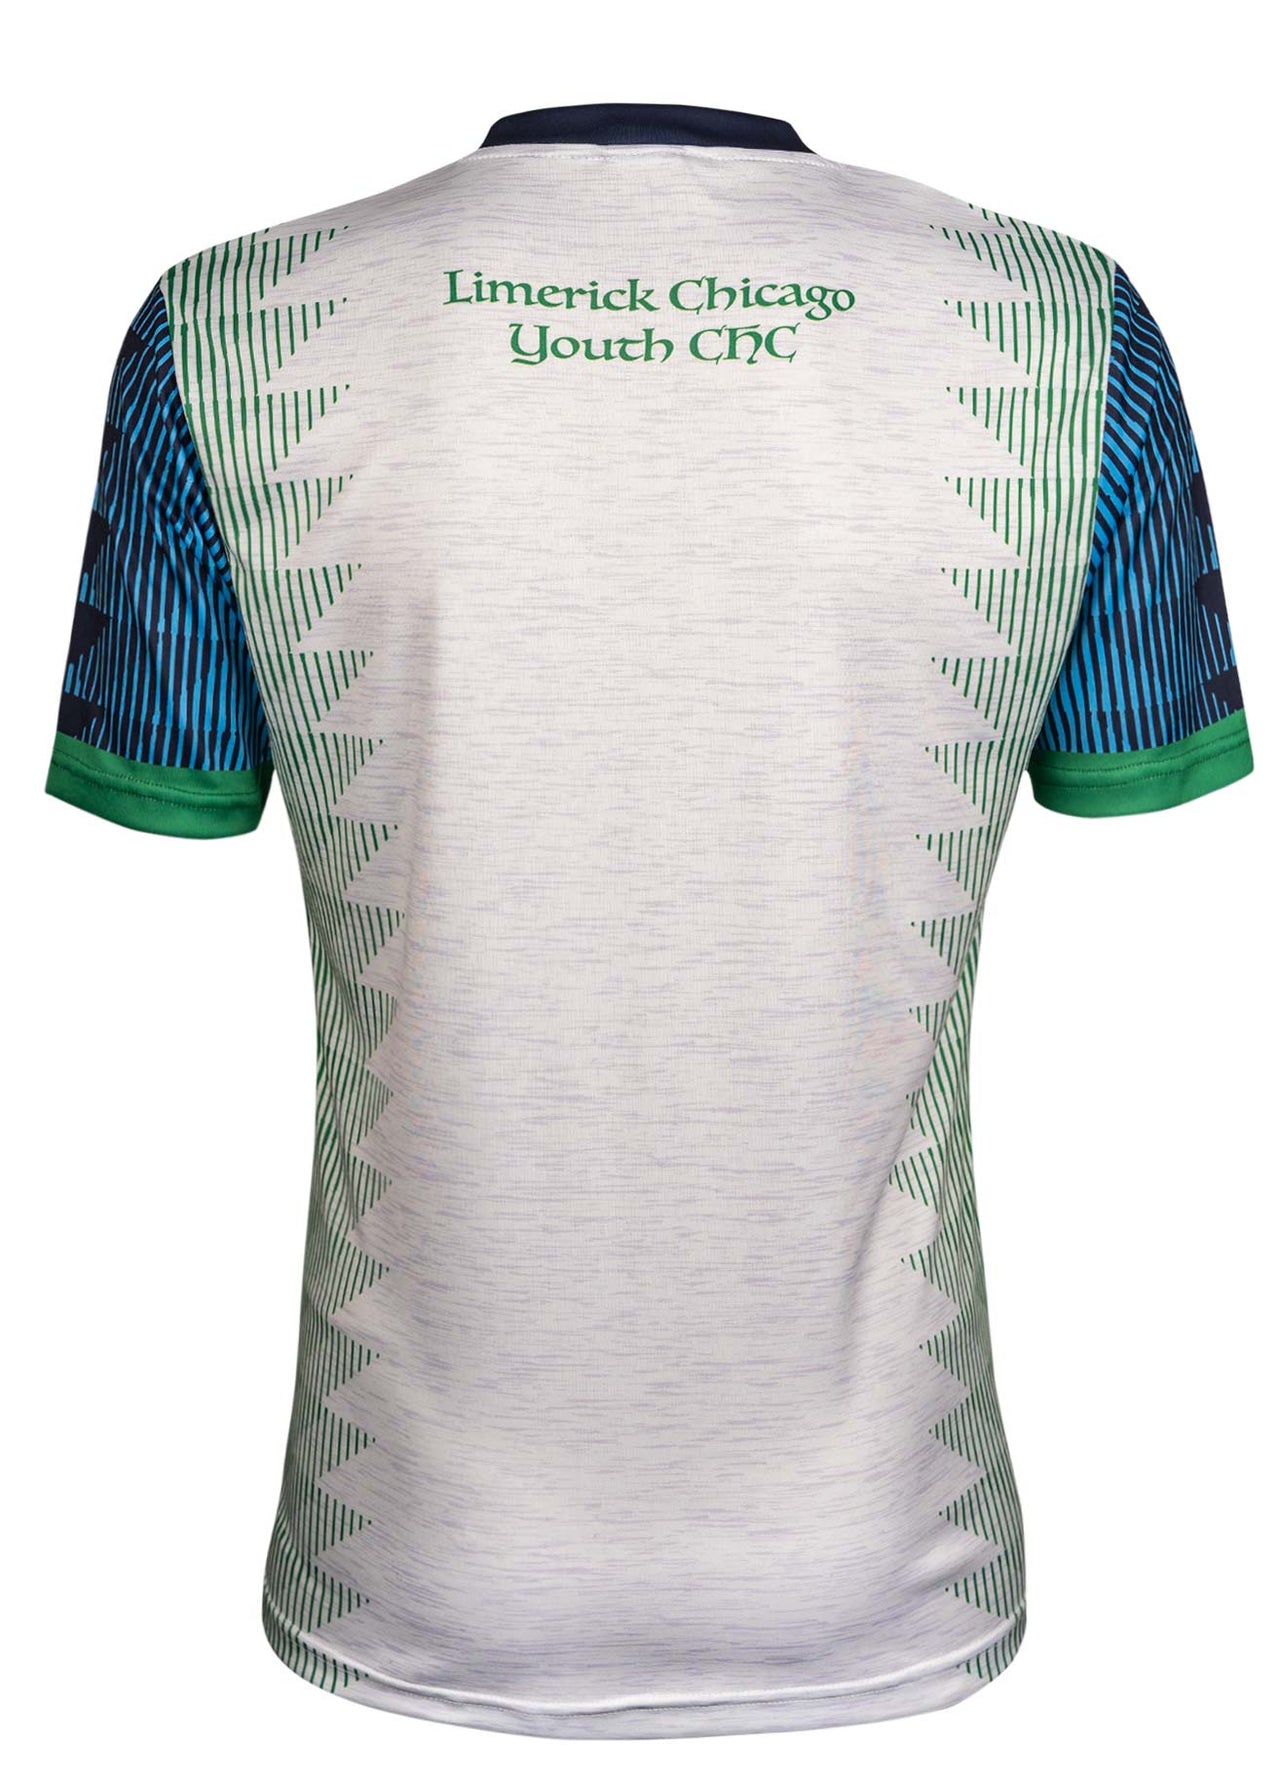 Limerick Chicago Youth Training Jersey Kids